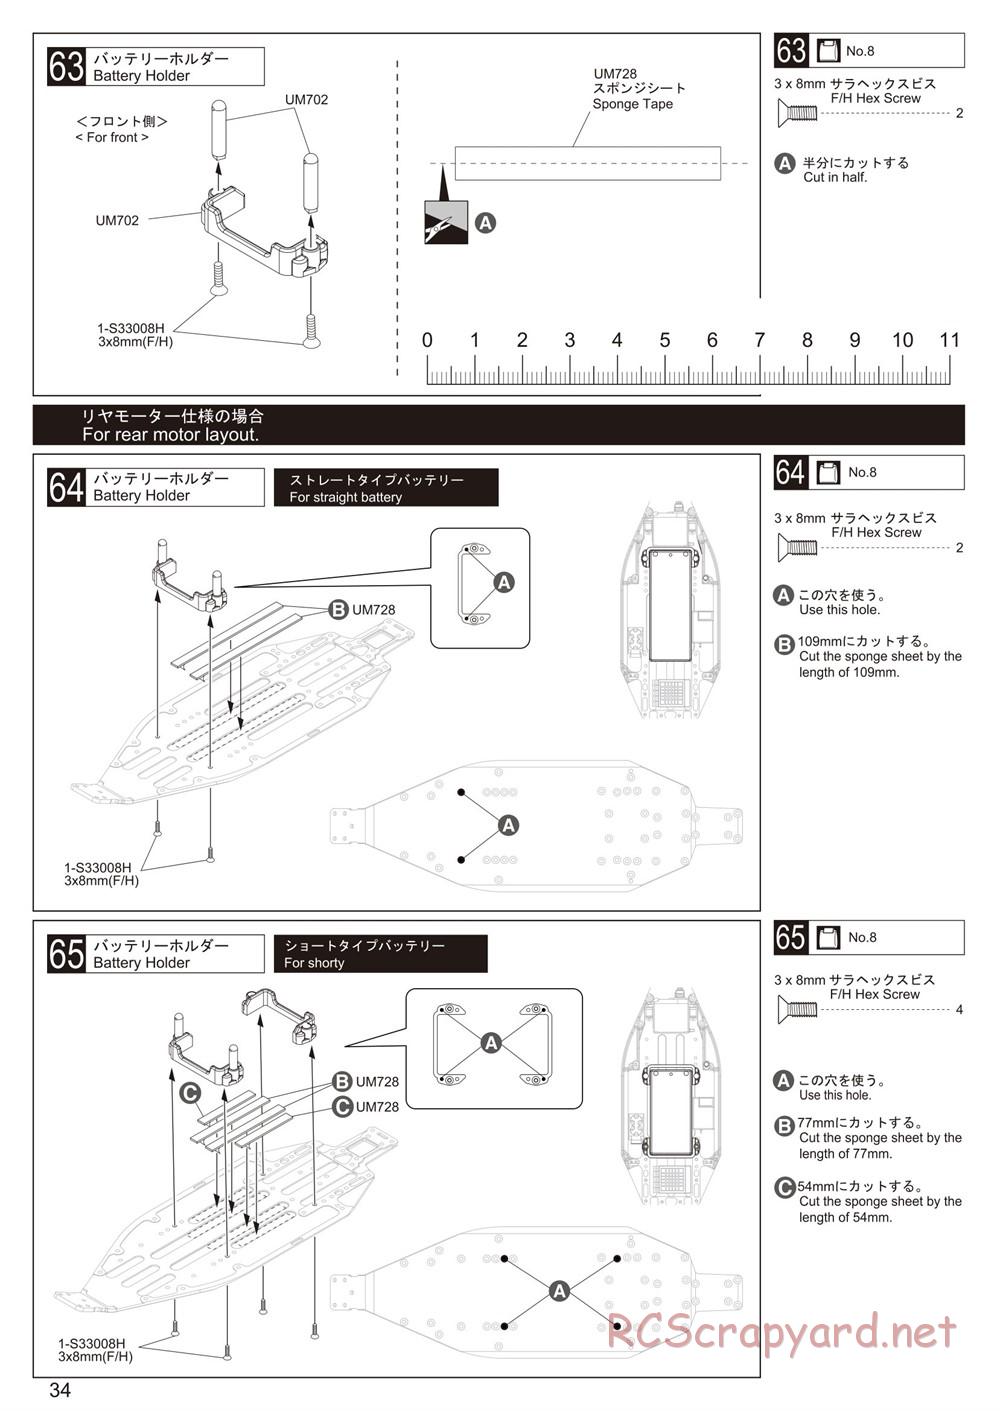 Kyosho - Ultima RB6.6 - Manual - Page 34